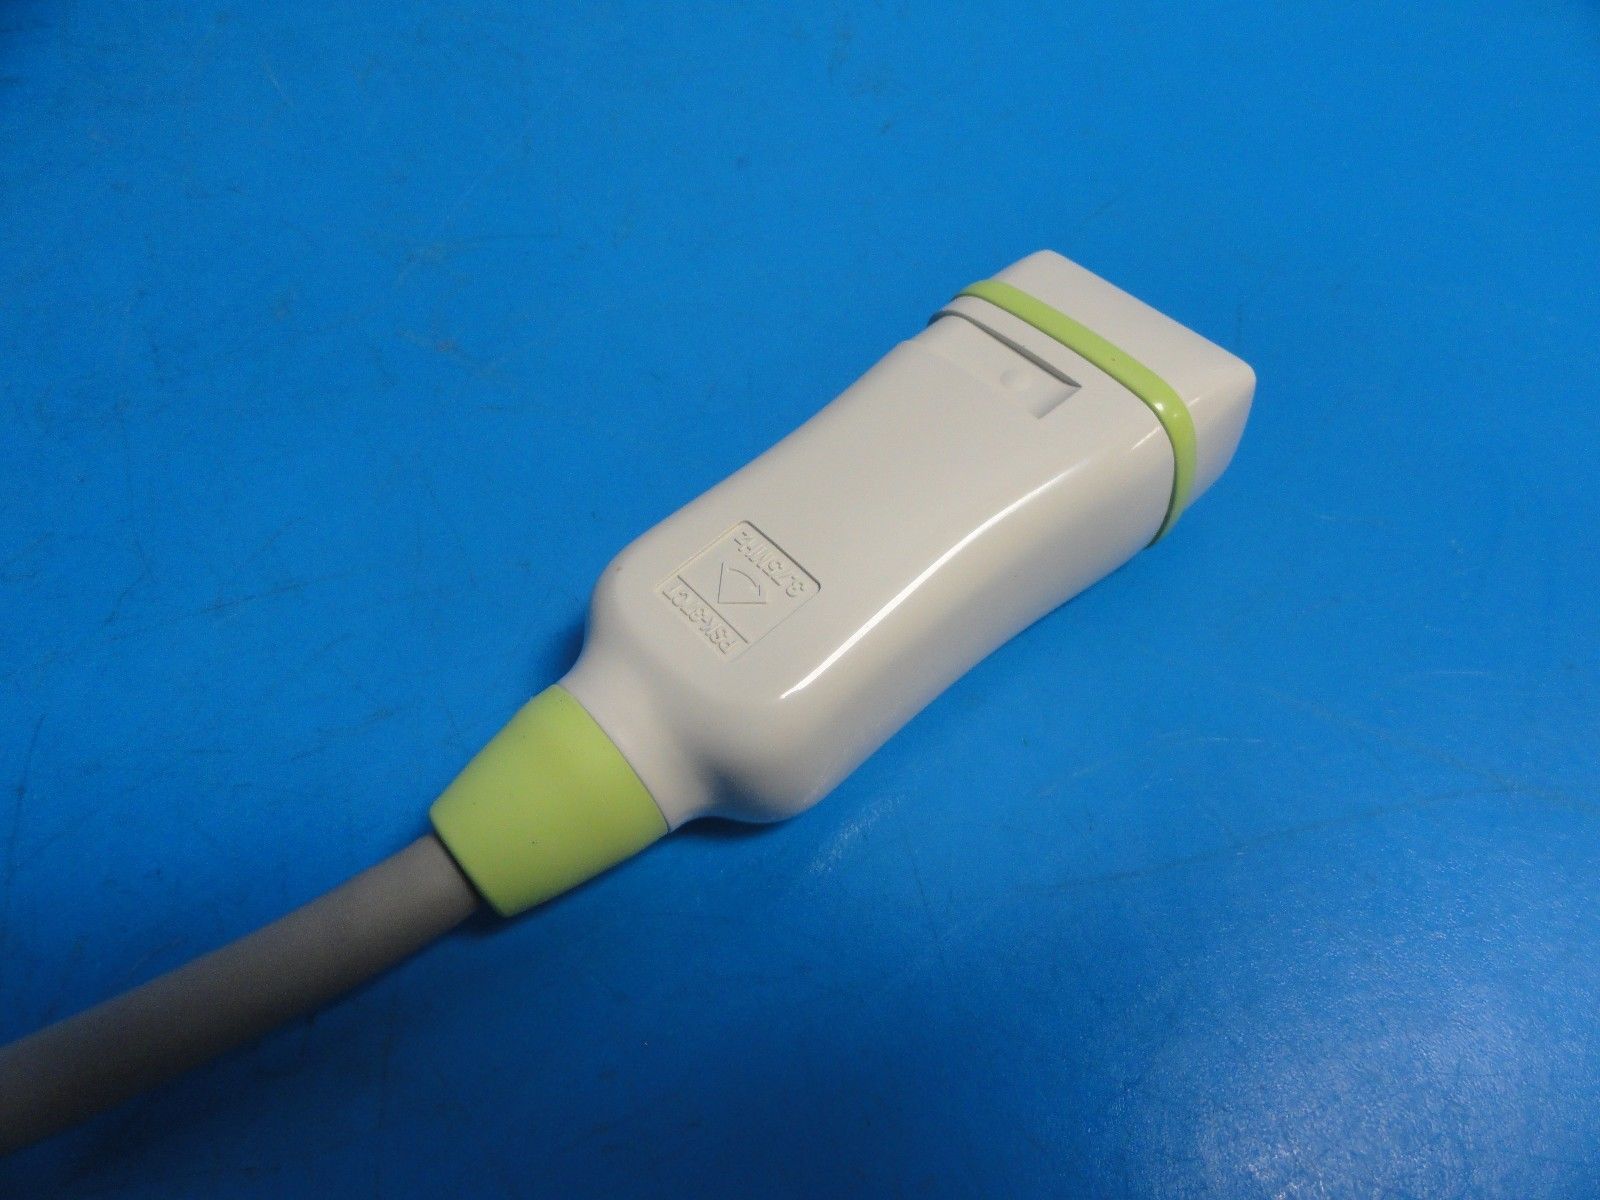 Toshiba PSK-37CT Linear Array Abdominal Sector Probe for PowerVision 7000 (8954) DIAGNOSTIC ULTRASOUND MACHINES FOR SALE